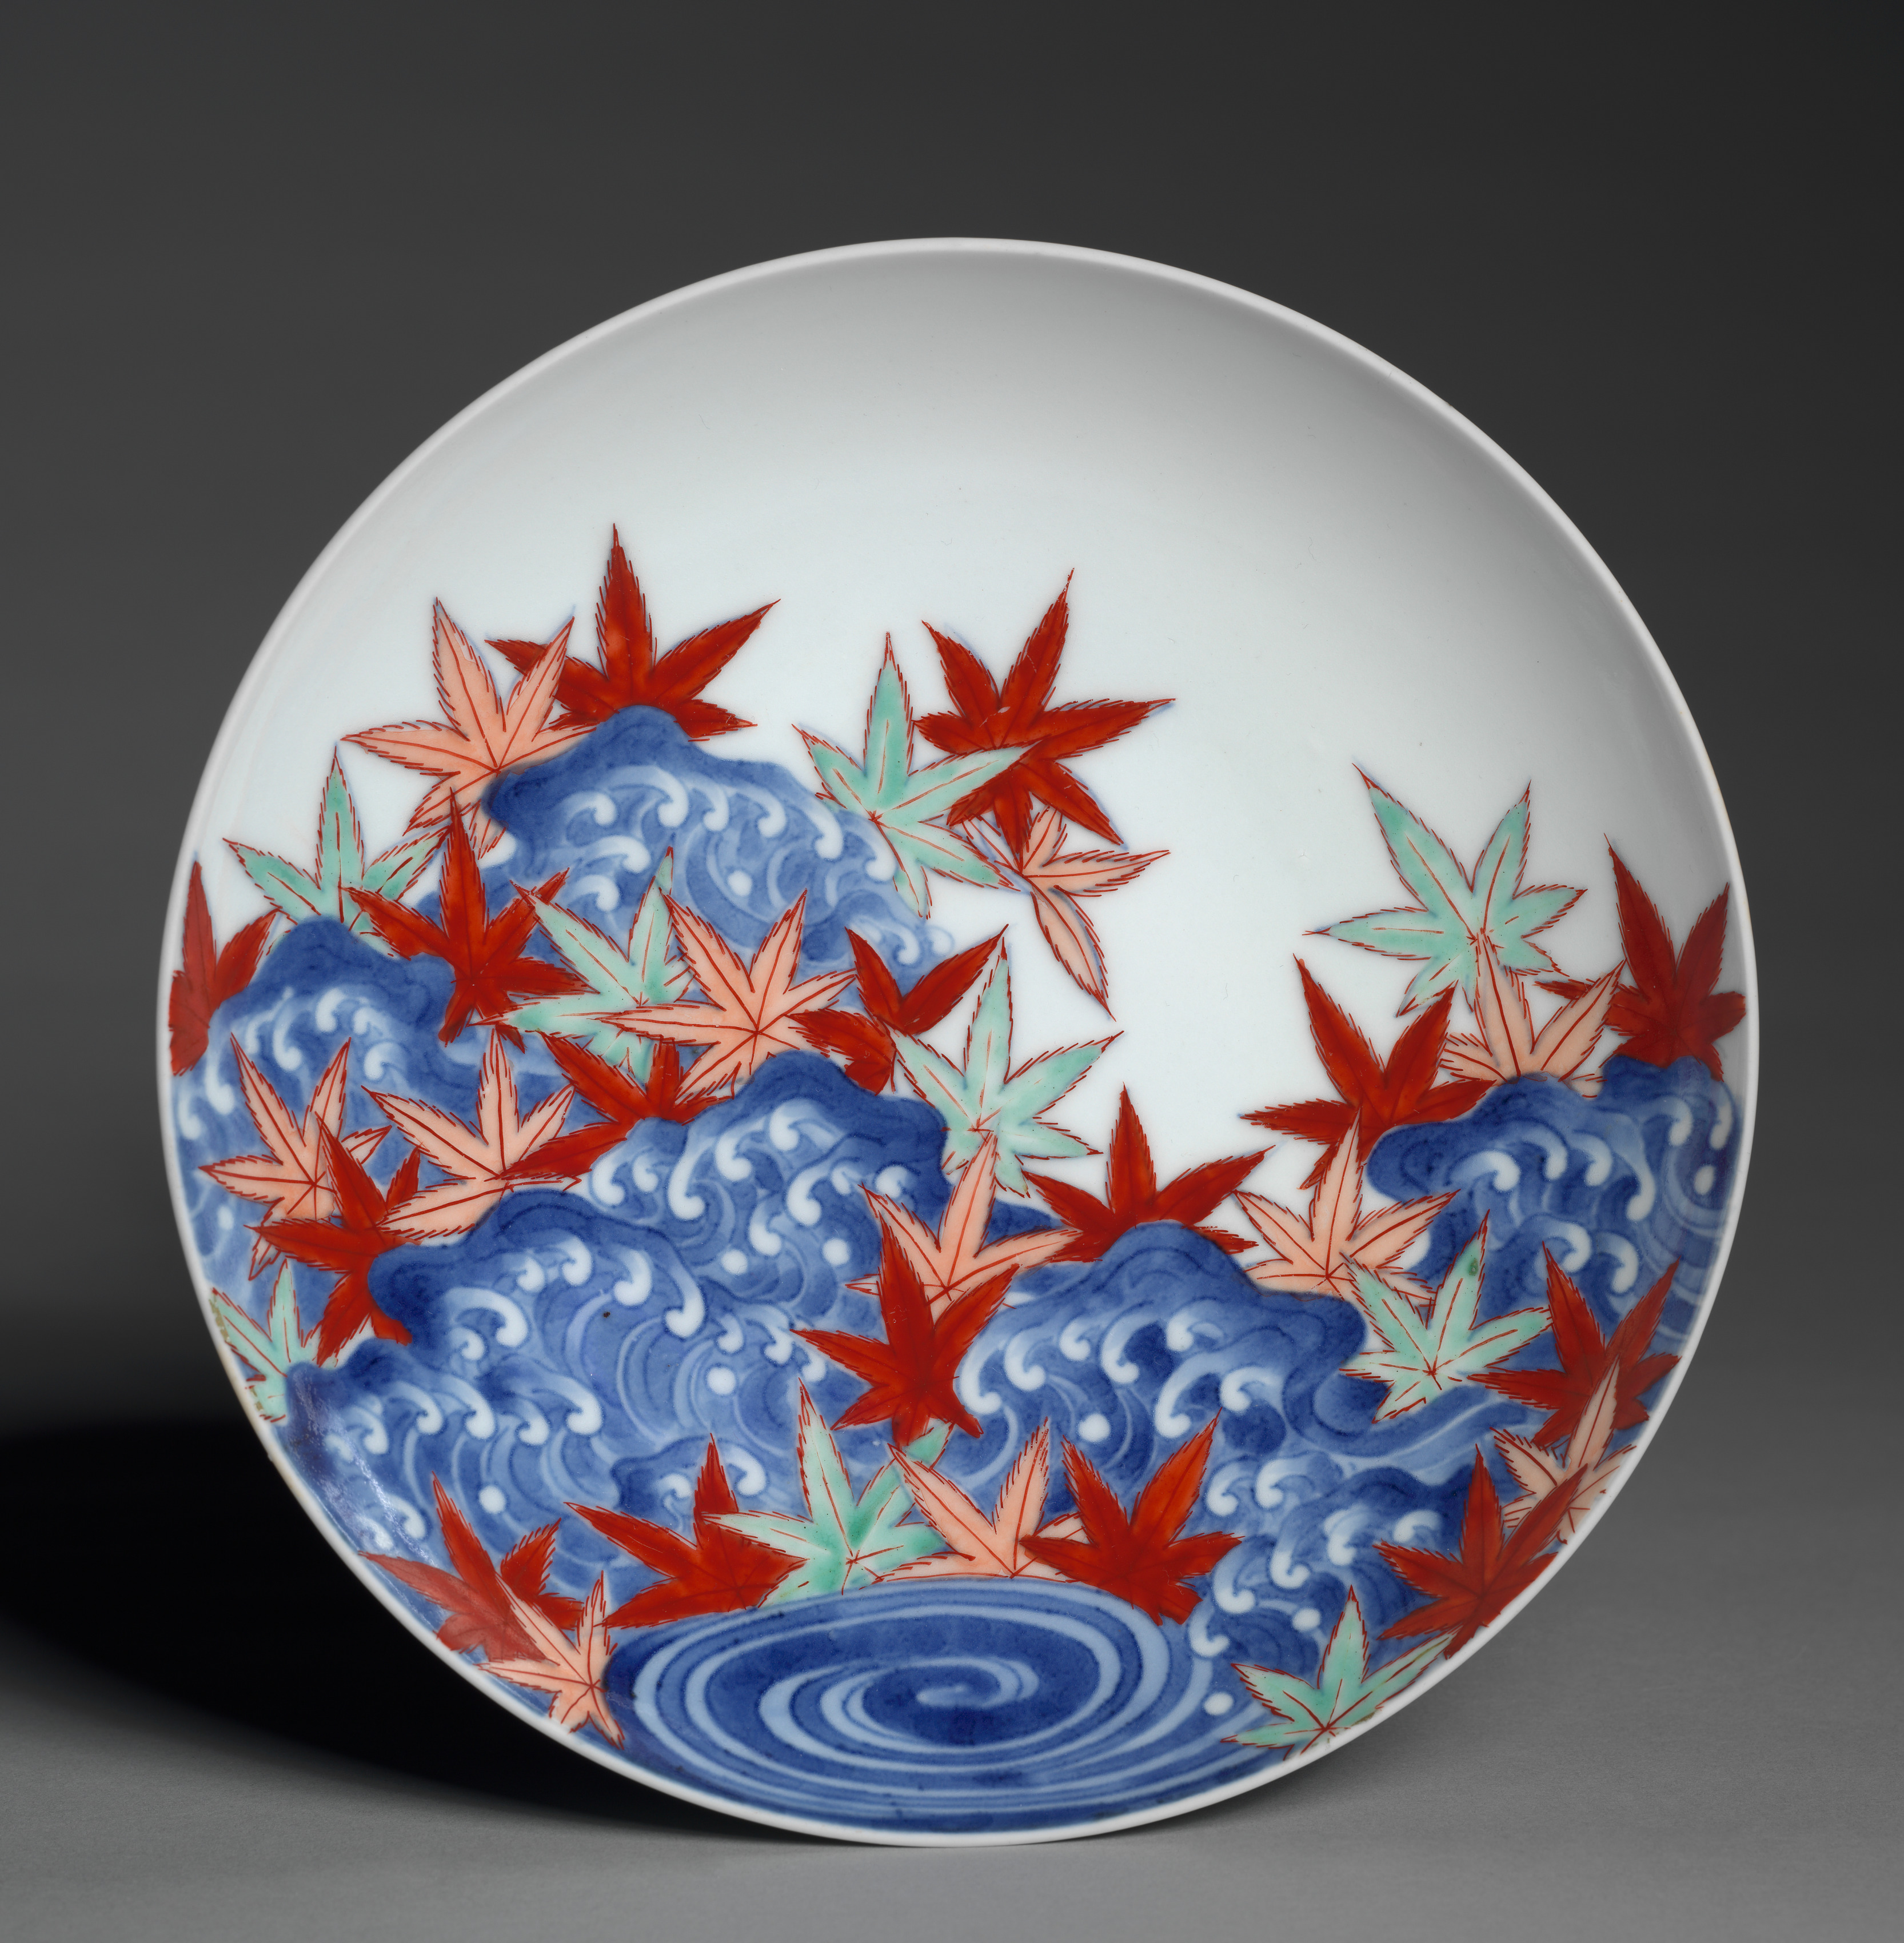 Dish with Maple Leaves in Waves